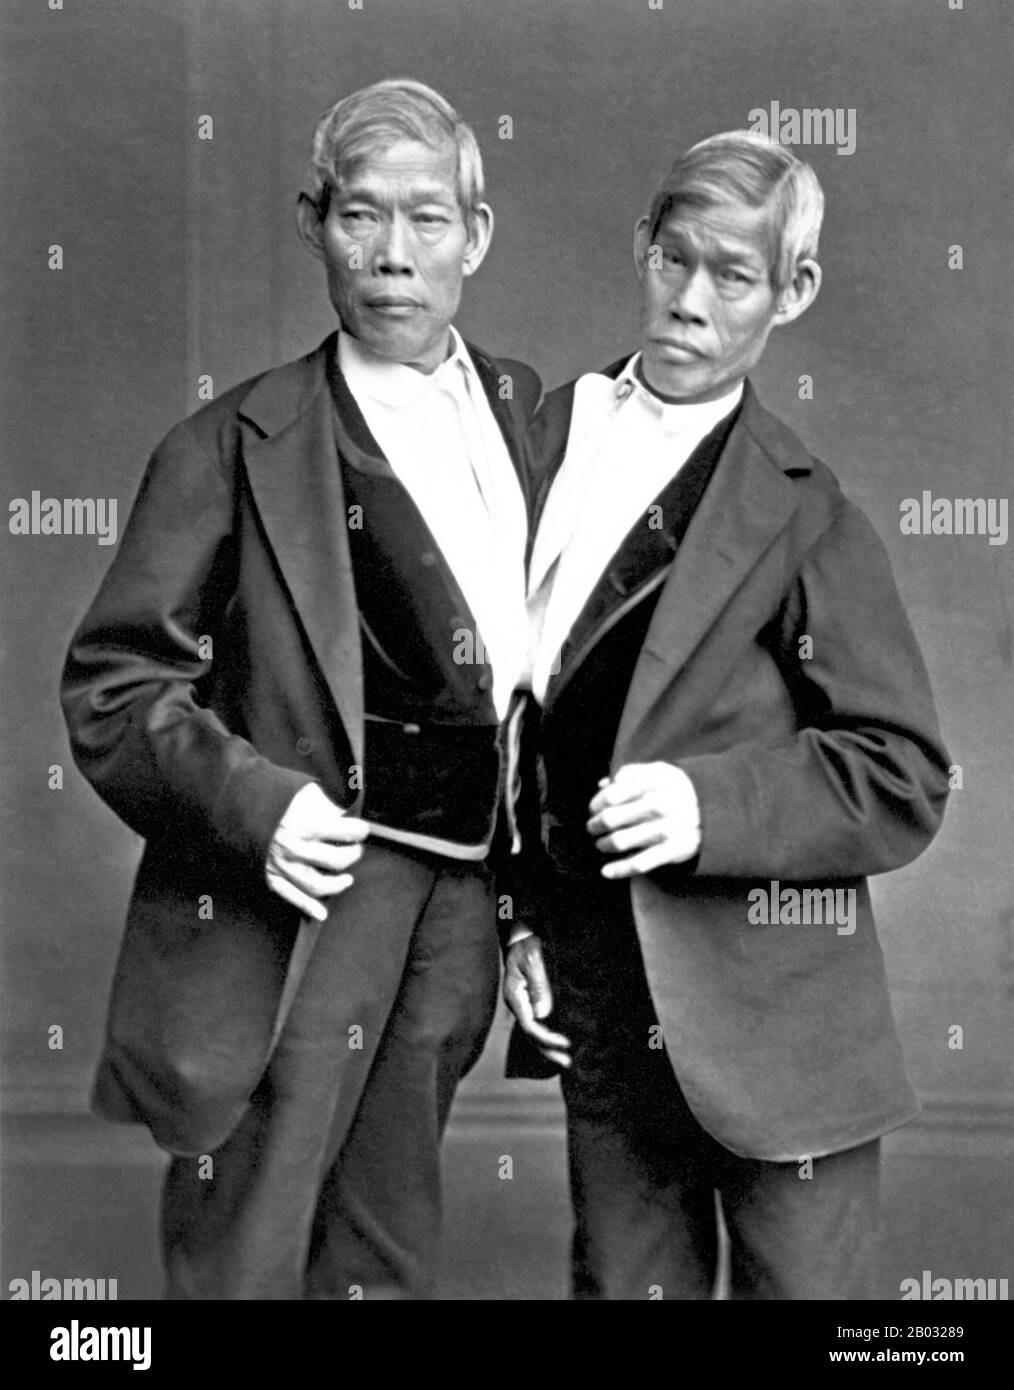 Chang and Eng Bunker (May 11, 1811 – January 17, 1874) were Thai-American conjoined twin brothers whose condition and birthplace became the basis for the term 'Siamese twins'.  The Bunker brothers were born on May 11, 1811, in the province of Samutsongkram, near Bangkok, in the Kingdom of Siam (today's Thailand). Their fisherman father was a Chinese Thai, while their mother was a Chinese Malaysian. Because of their Chinese heritage, they were known locally as the 'Chinese Twins'. The brothers were joined at the sternum by a small piece of cartilage, and though their livers were fused, they wer Stock Photo